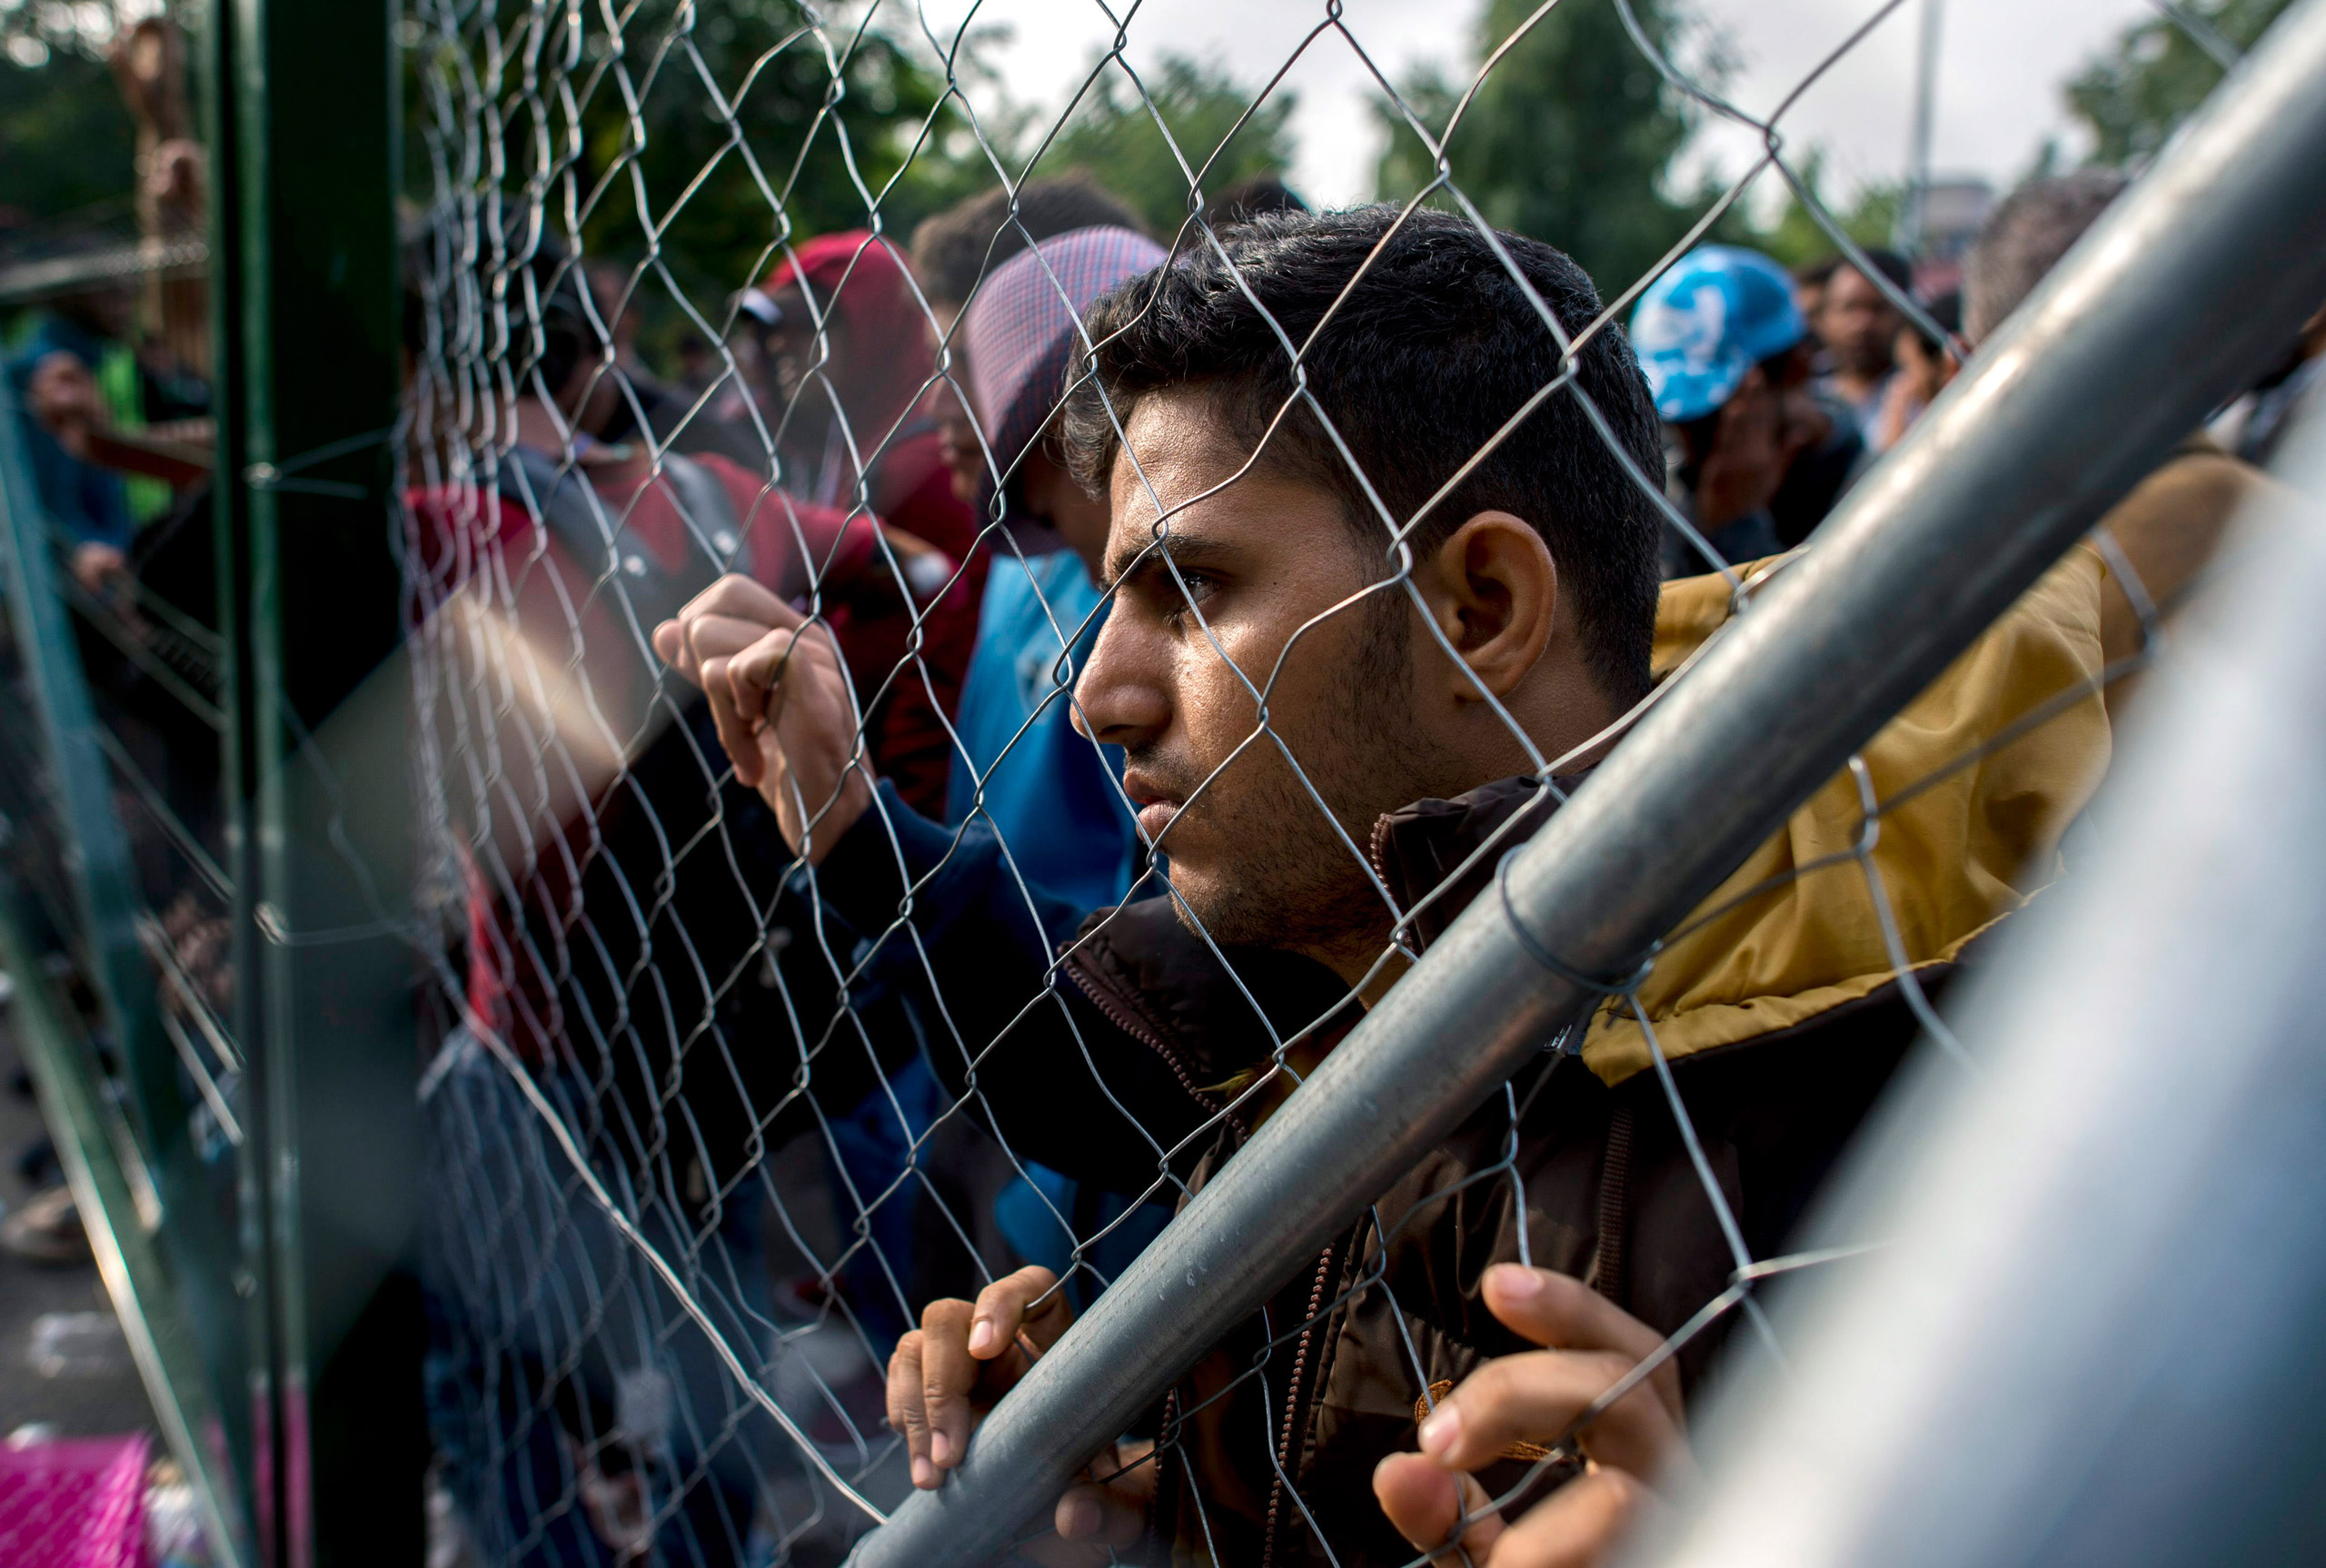 A migrant looks through a fence at the closed border crossing between Hungary and Serbia near Horgos, Serbia, on Sept. 15, 2015. (Tamas Soki—AP)